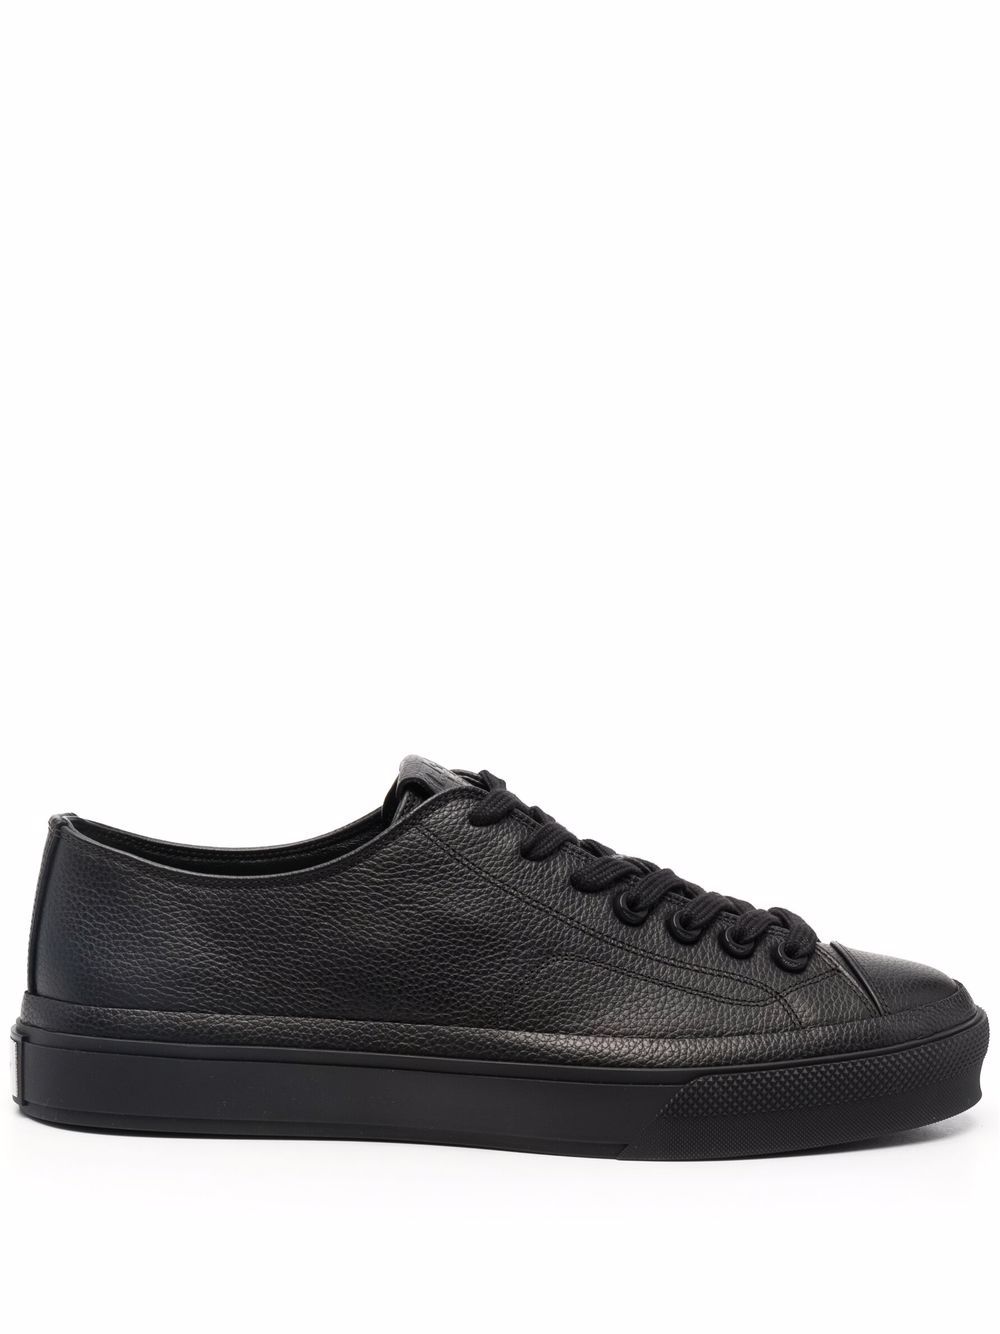 City Low Leather Sneakers мъжки обувки Givenchy 843606331_39